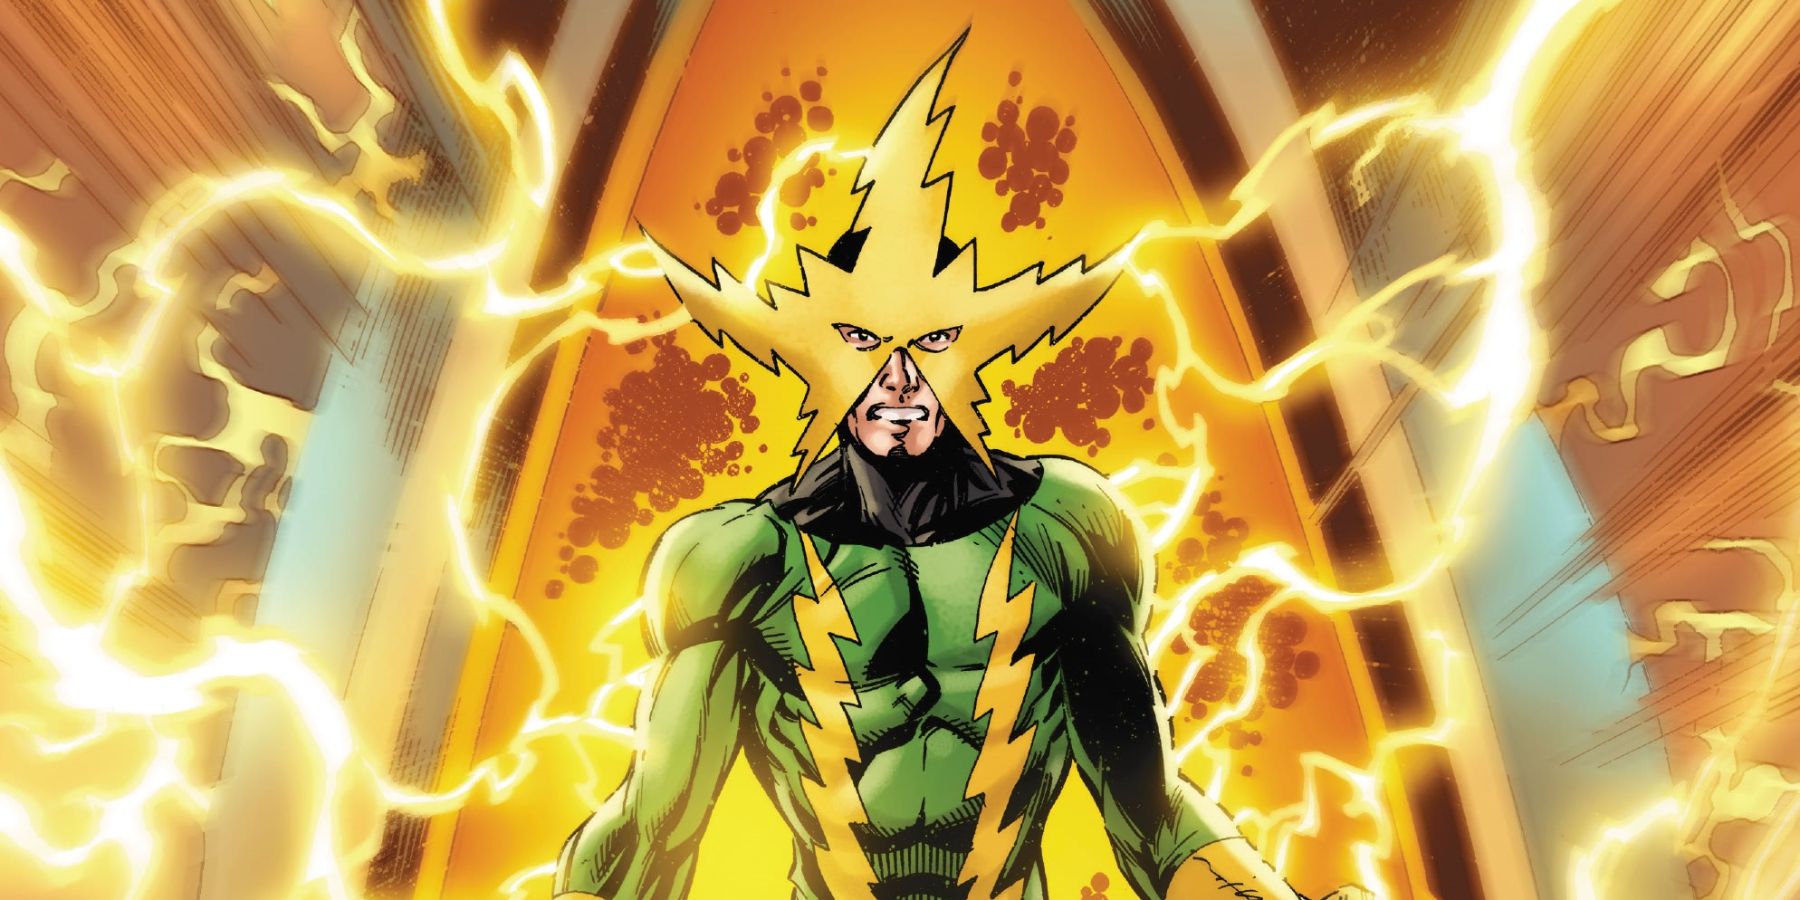 Electro charging with energy in Marvel comics